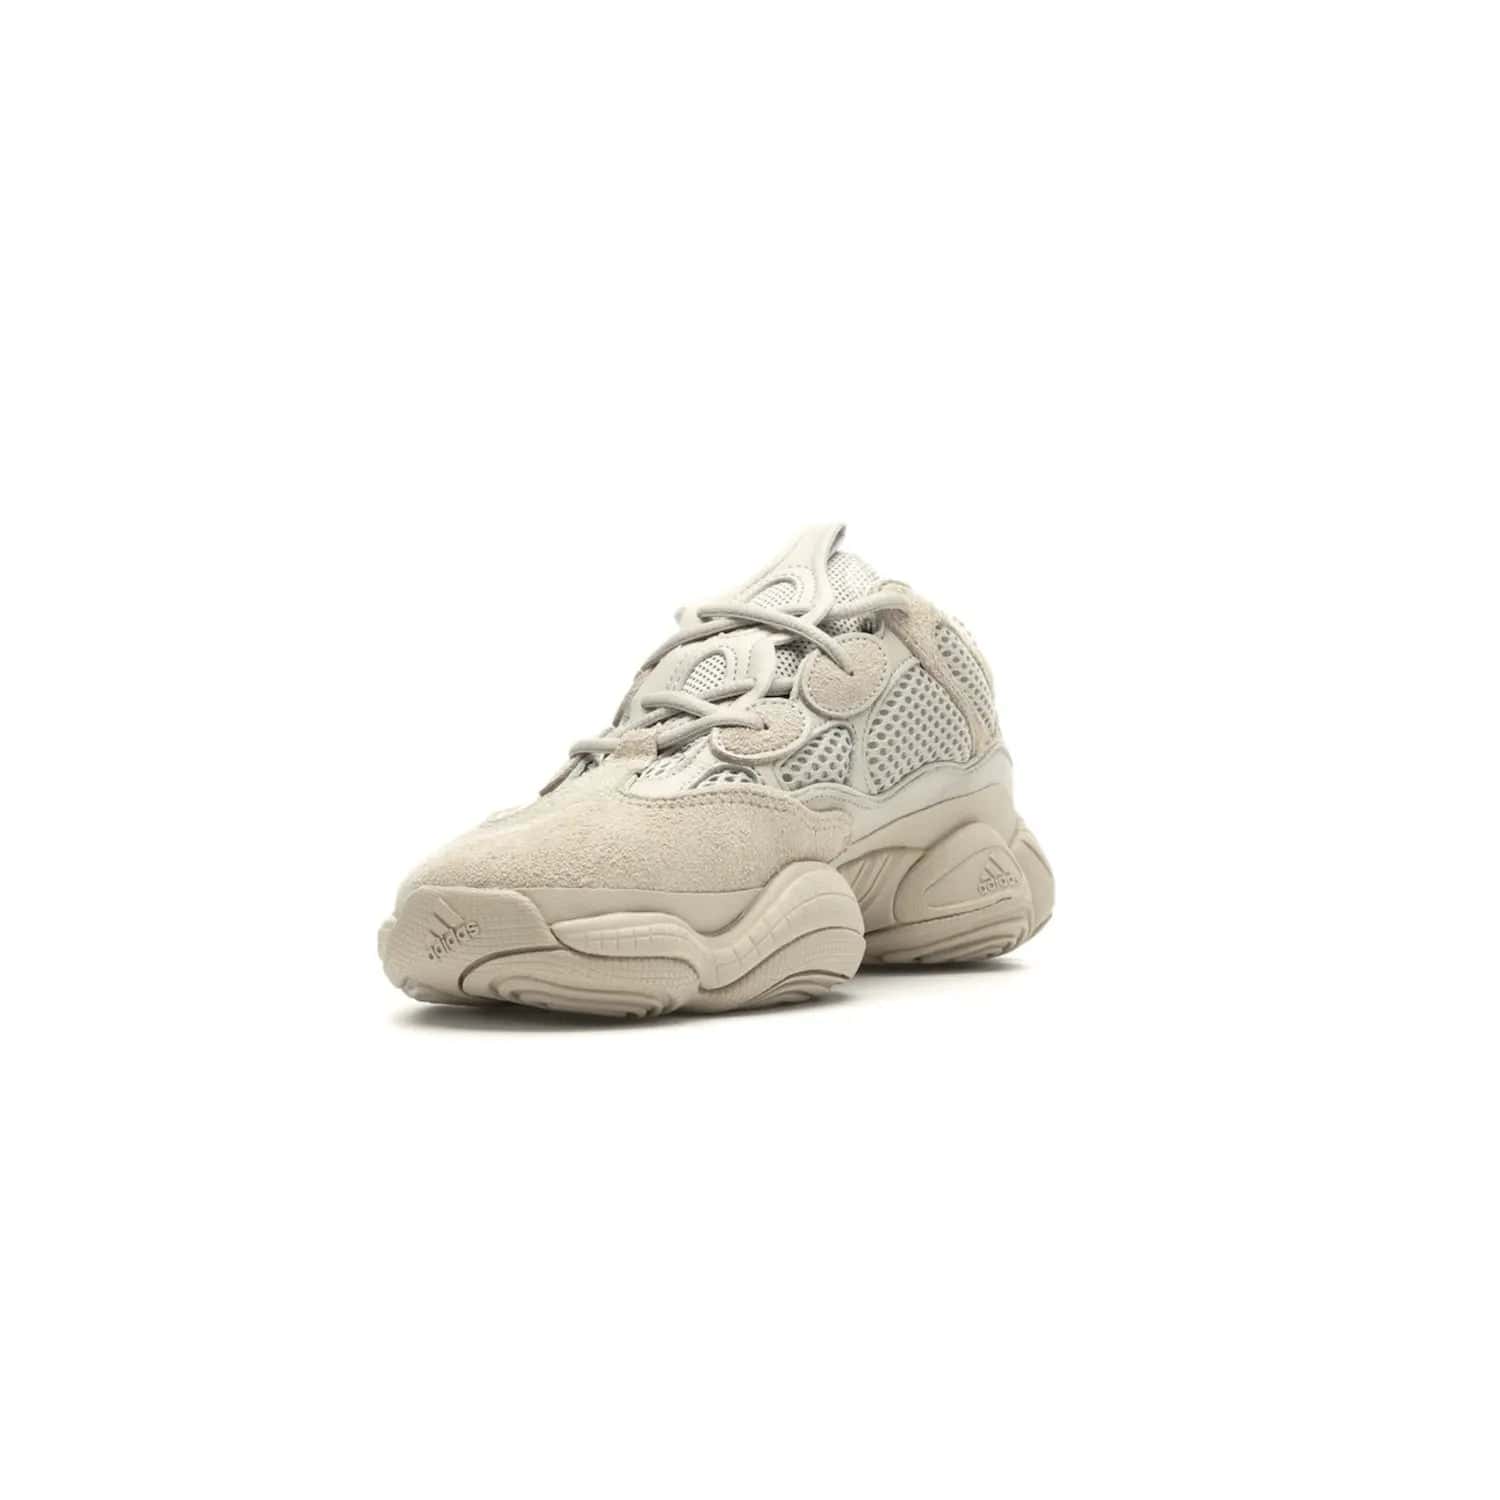 adidas Yeezy 500 Blush - Image 13 - Only at www.BallersClubKickz.com - Step up your sneaker game with the Adidas Yeezy 500 Blush. Monochromatic pale pink palette, hiking-inspired suede/mesh construction, plus adiPRENE sole for comfort and performance. Get the Adidas Yeezy 500 and experience true style and comfort.